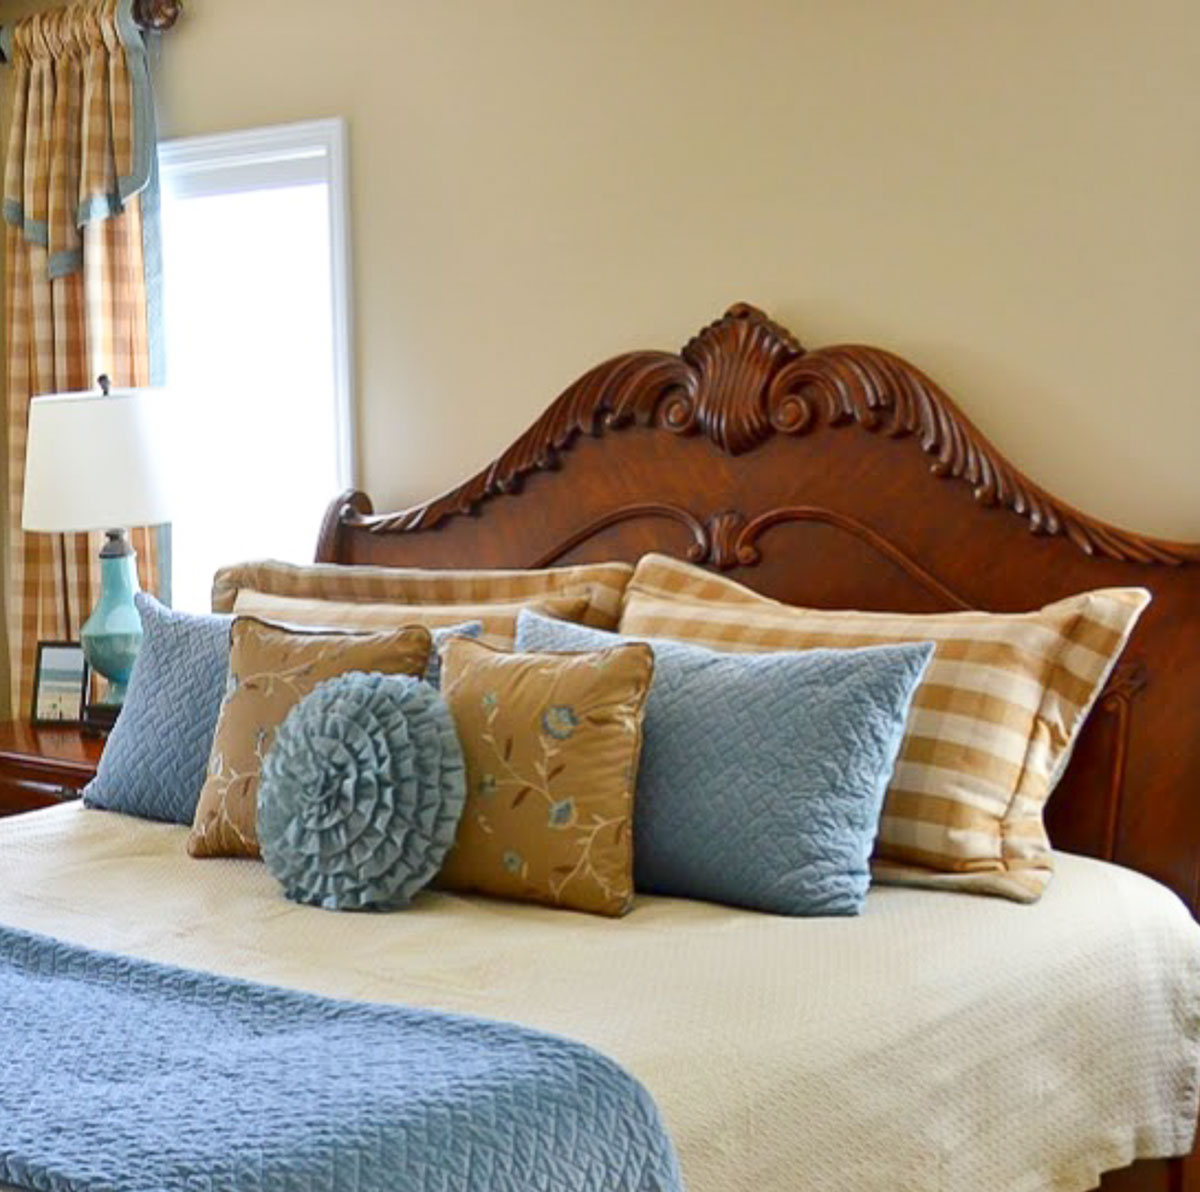 brown, cream and blue bed pillows and throw pillows on a king size bed with a wood headboard